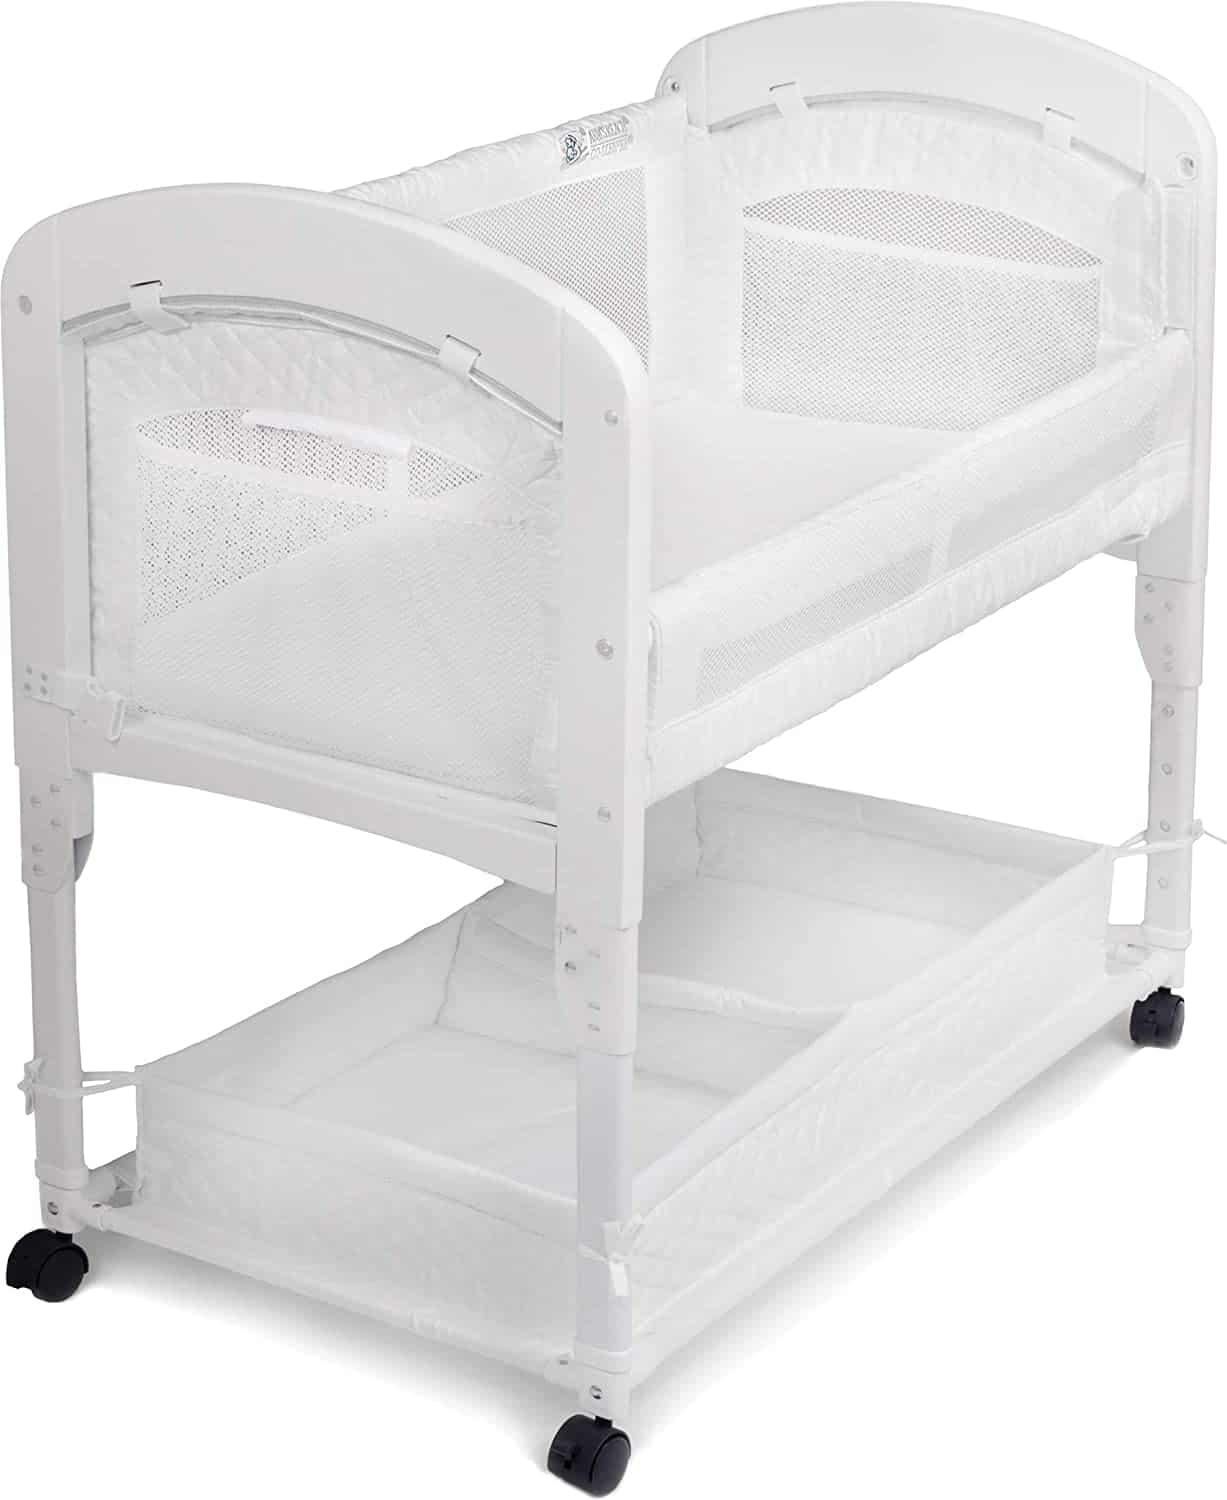 Arm's Reach Concepts Cambria Baby Bassinet - Best Co-sleeper Bassinet